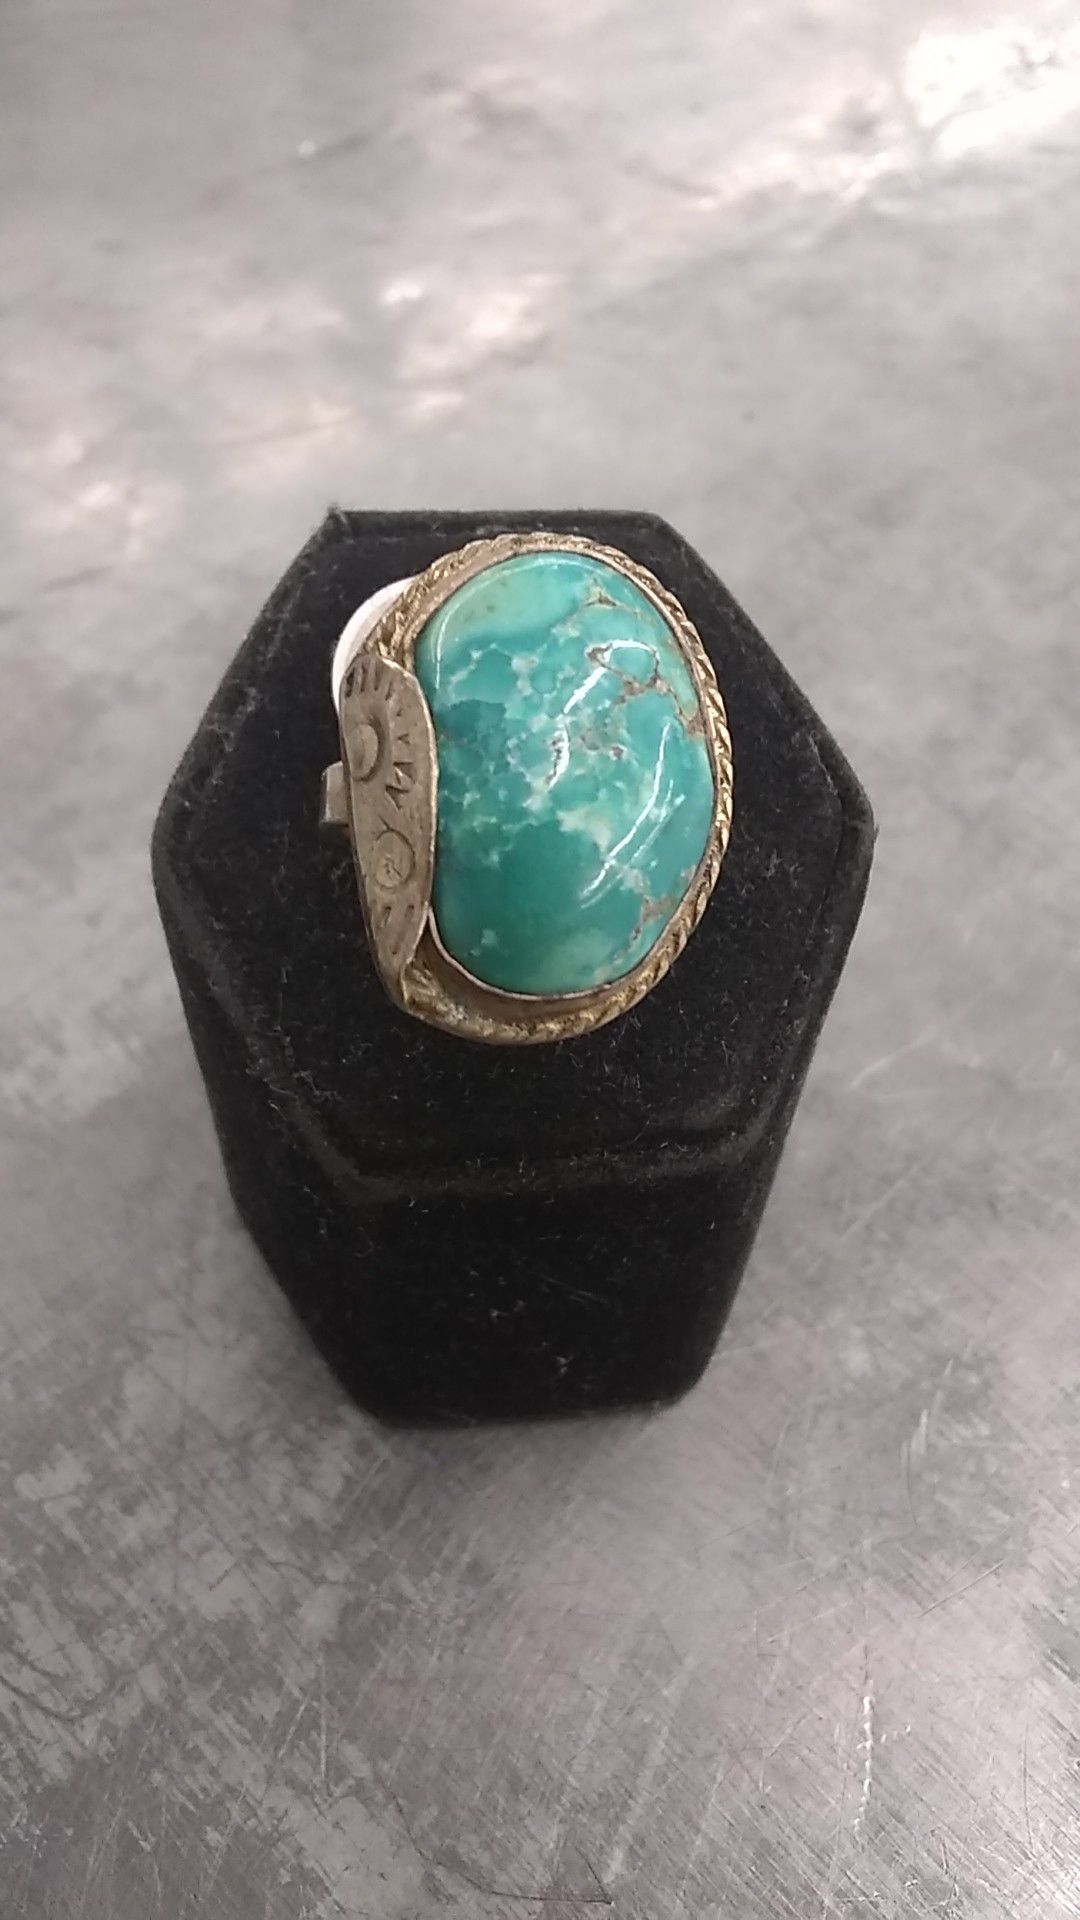 Blue turquoise in silver ring